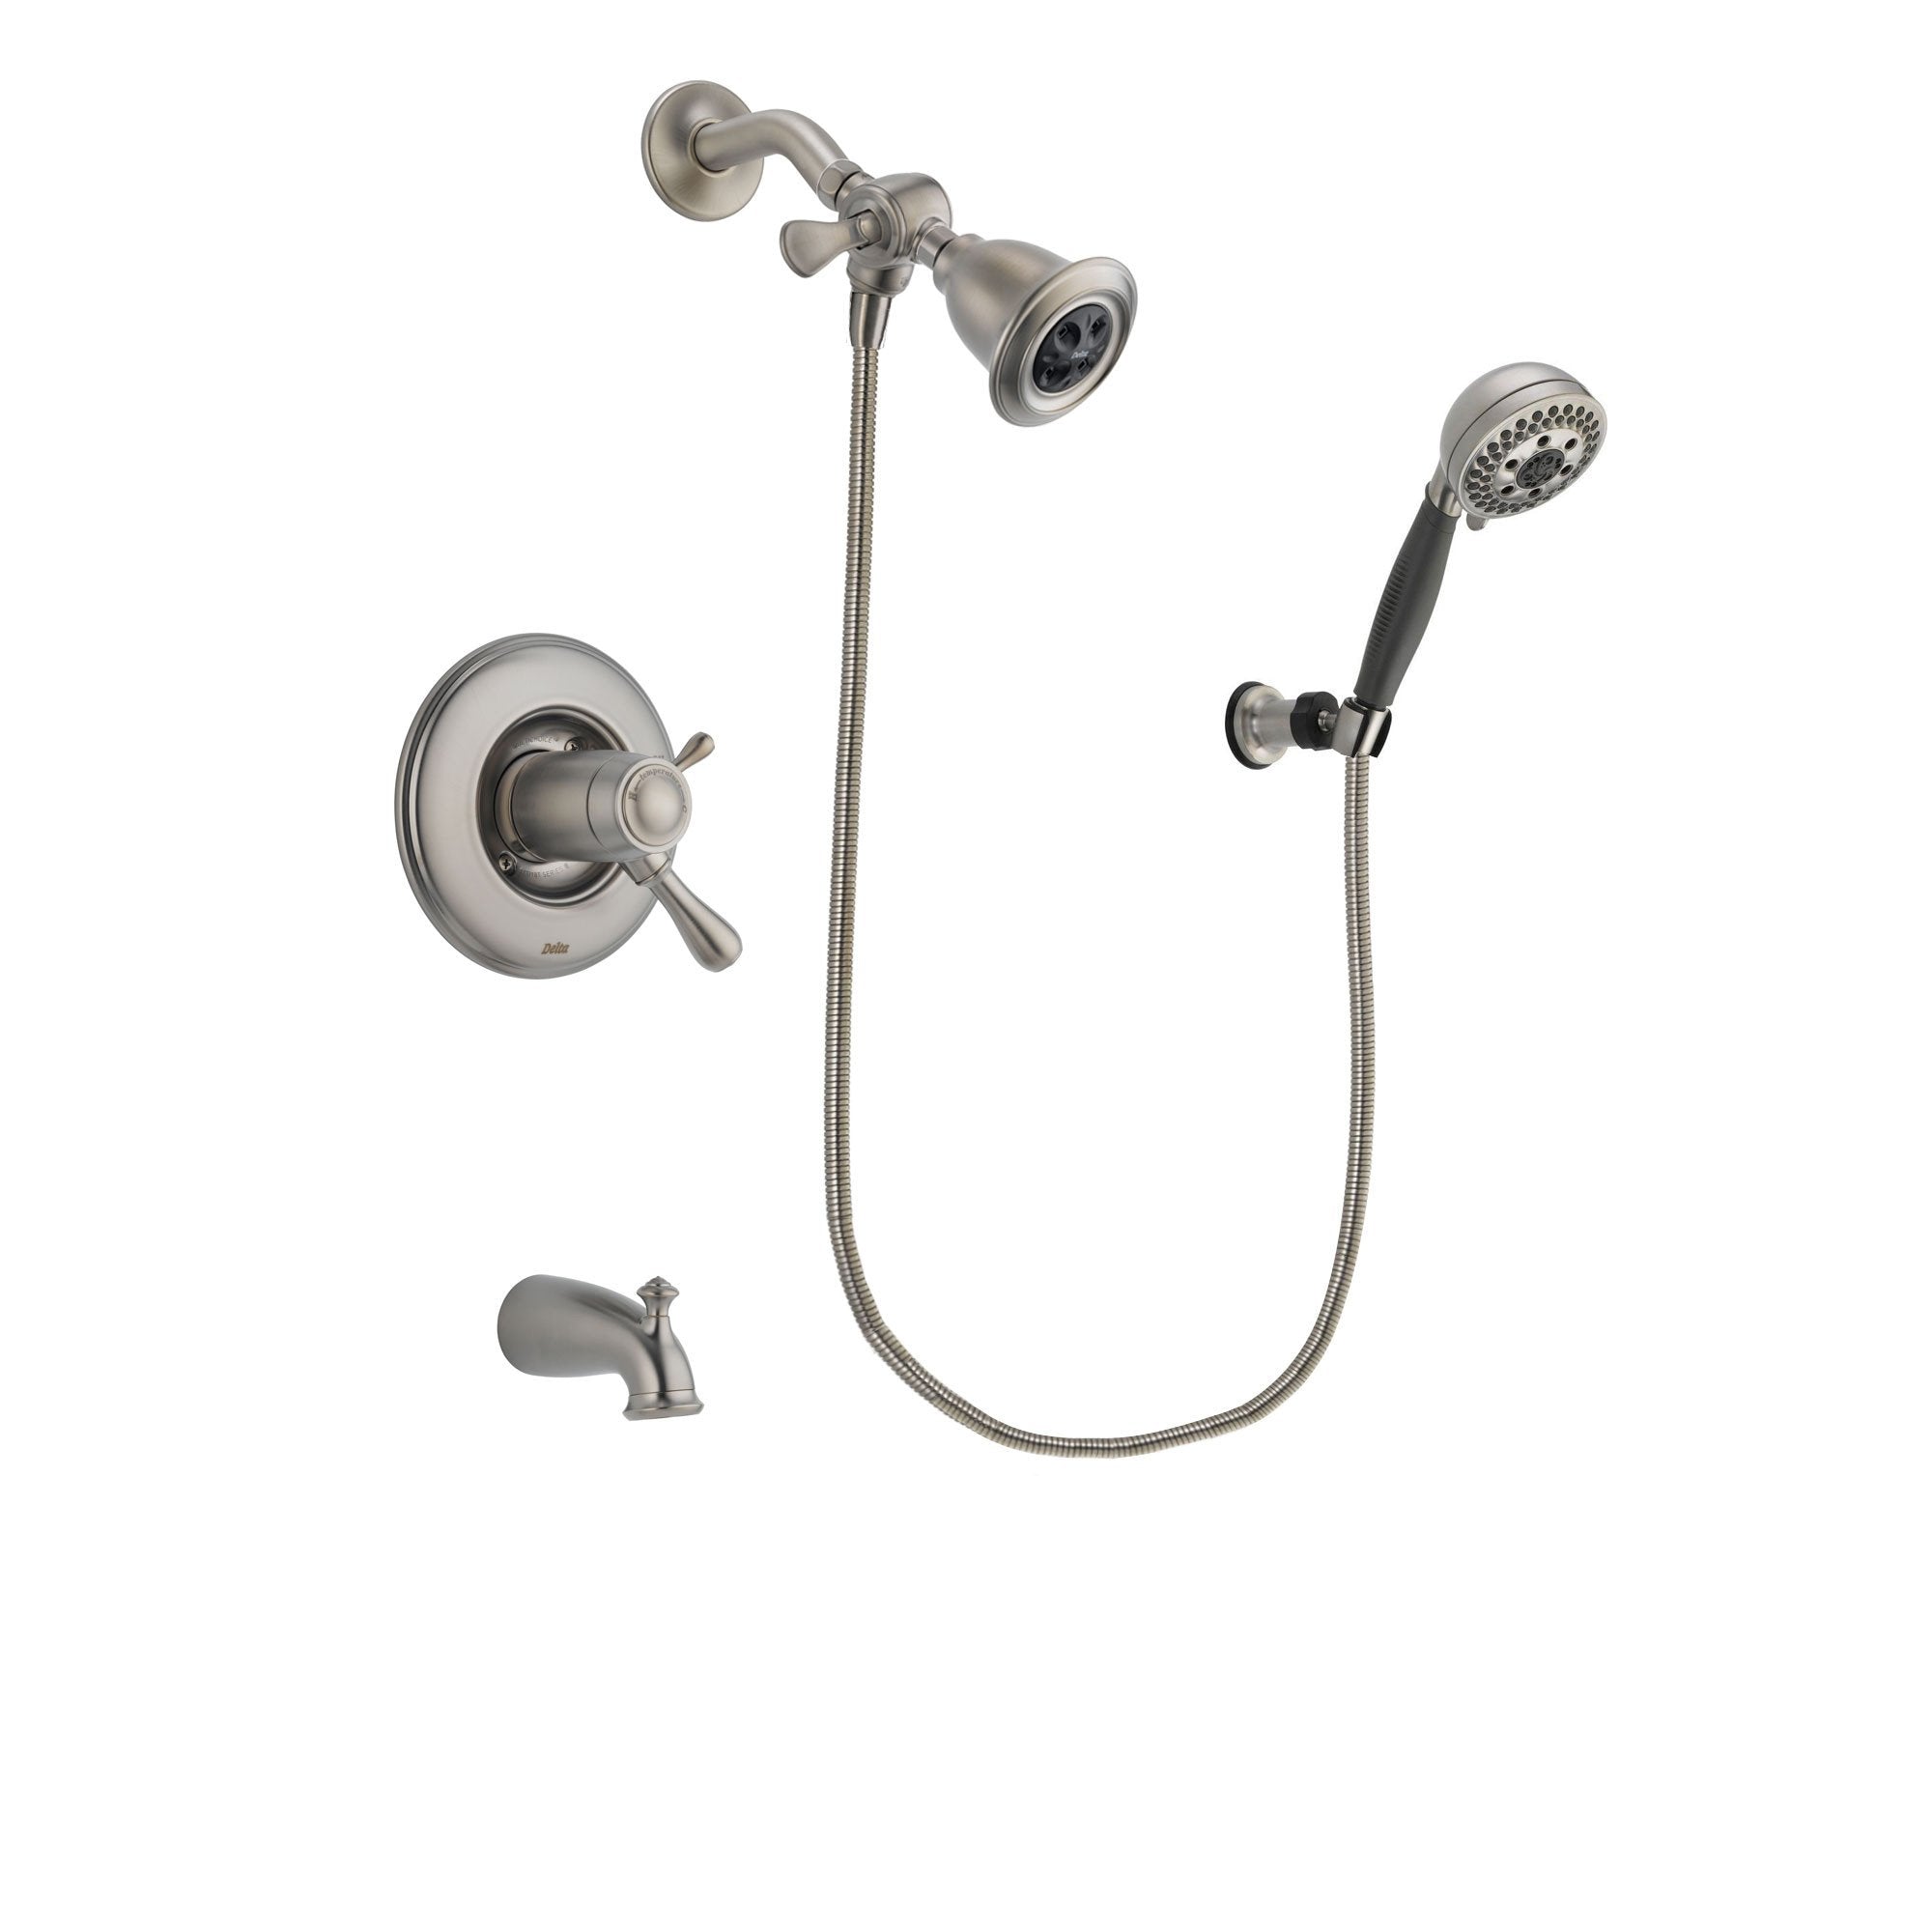 Delta Leland Stainless Steel Finish Thermostatic Tub and Shower Faucet System Package with Water Efficient Showerhead and 5-Setting Wall Mount Personal Handheld Shower Includes Rough-in Valve and Tub Spout DSP1959V